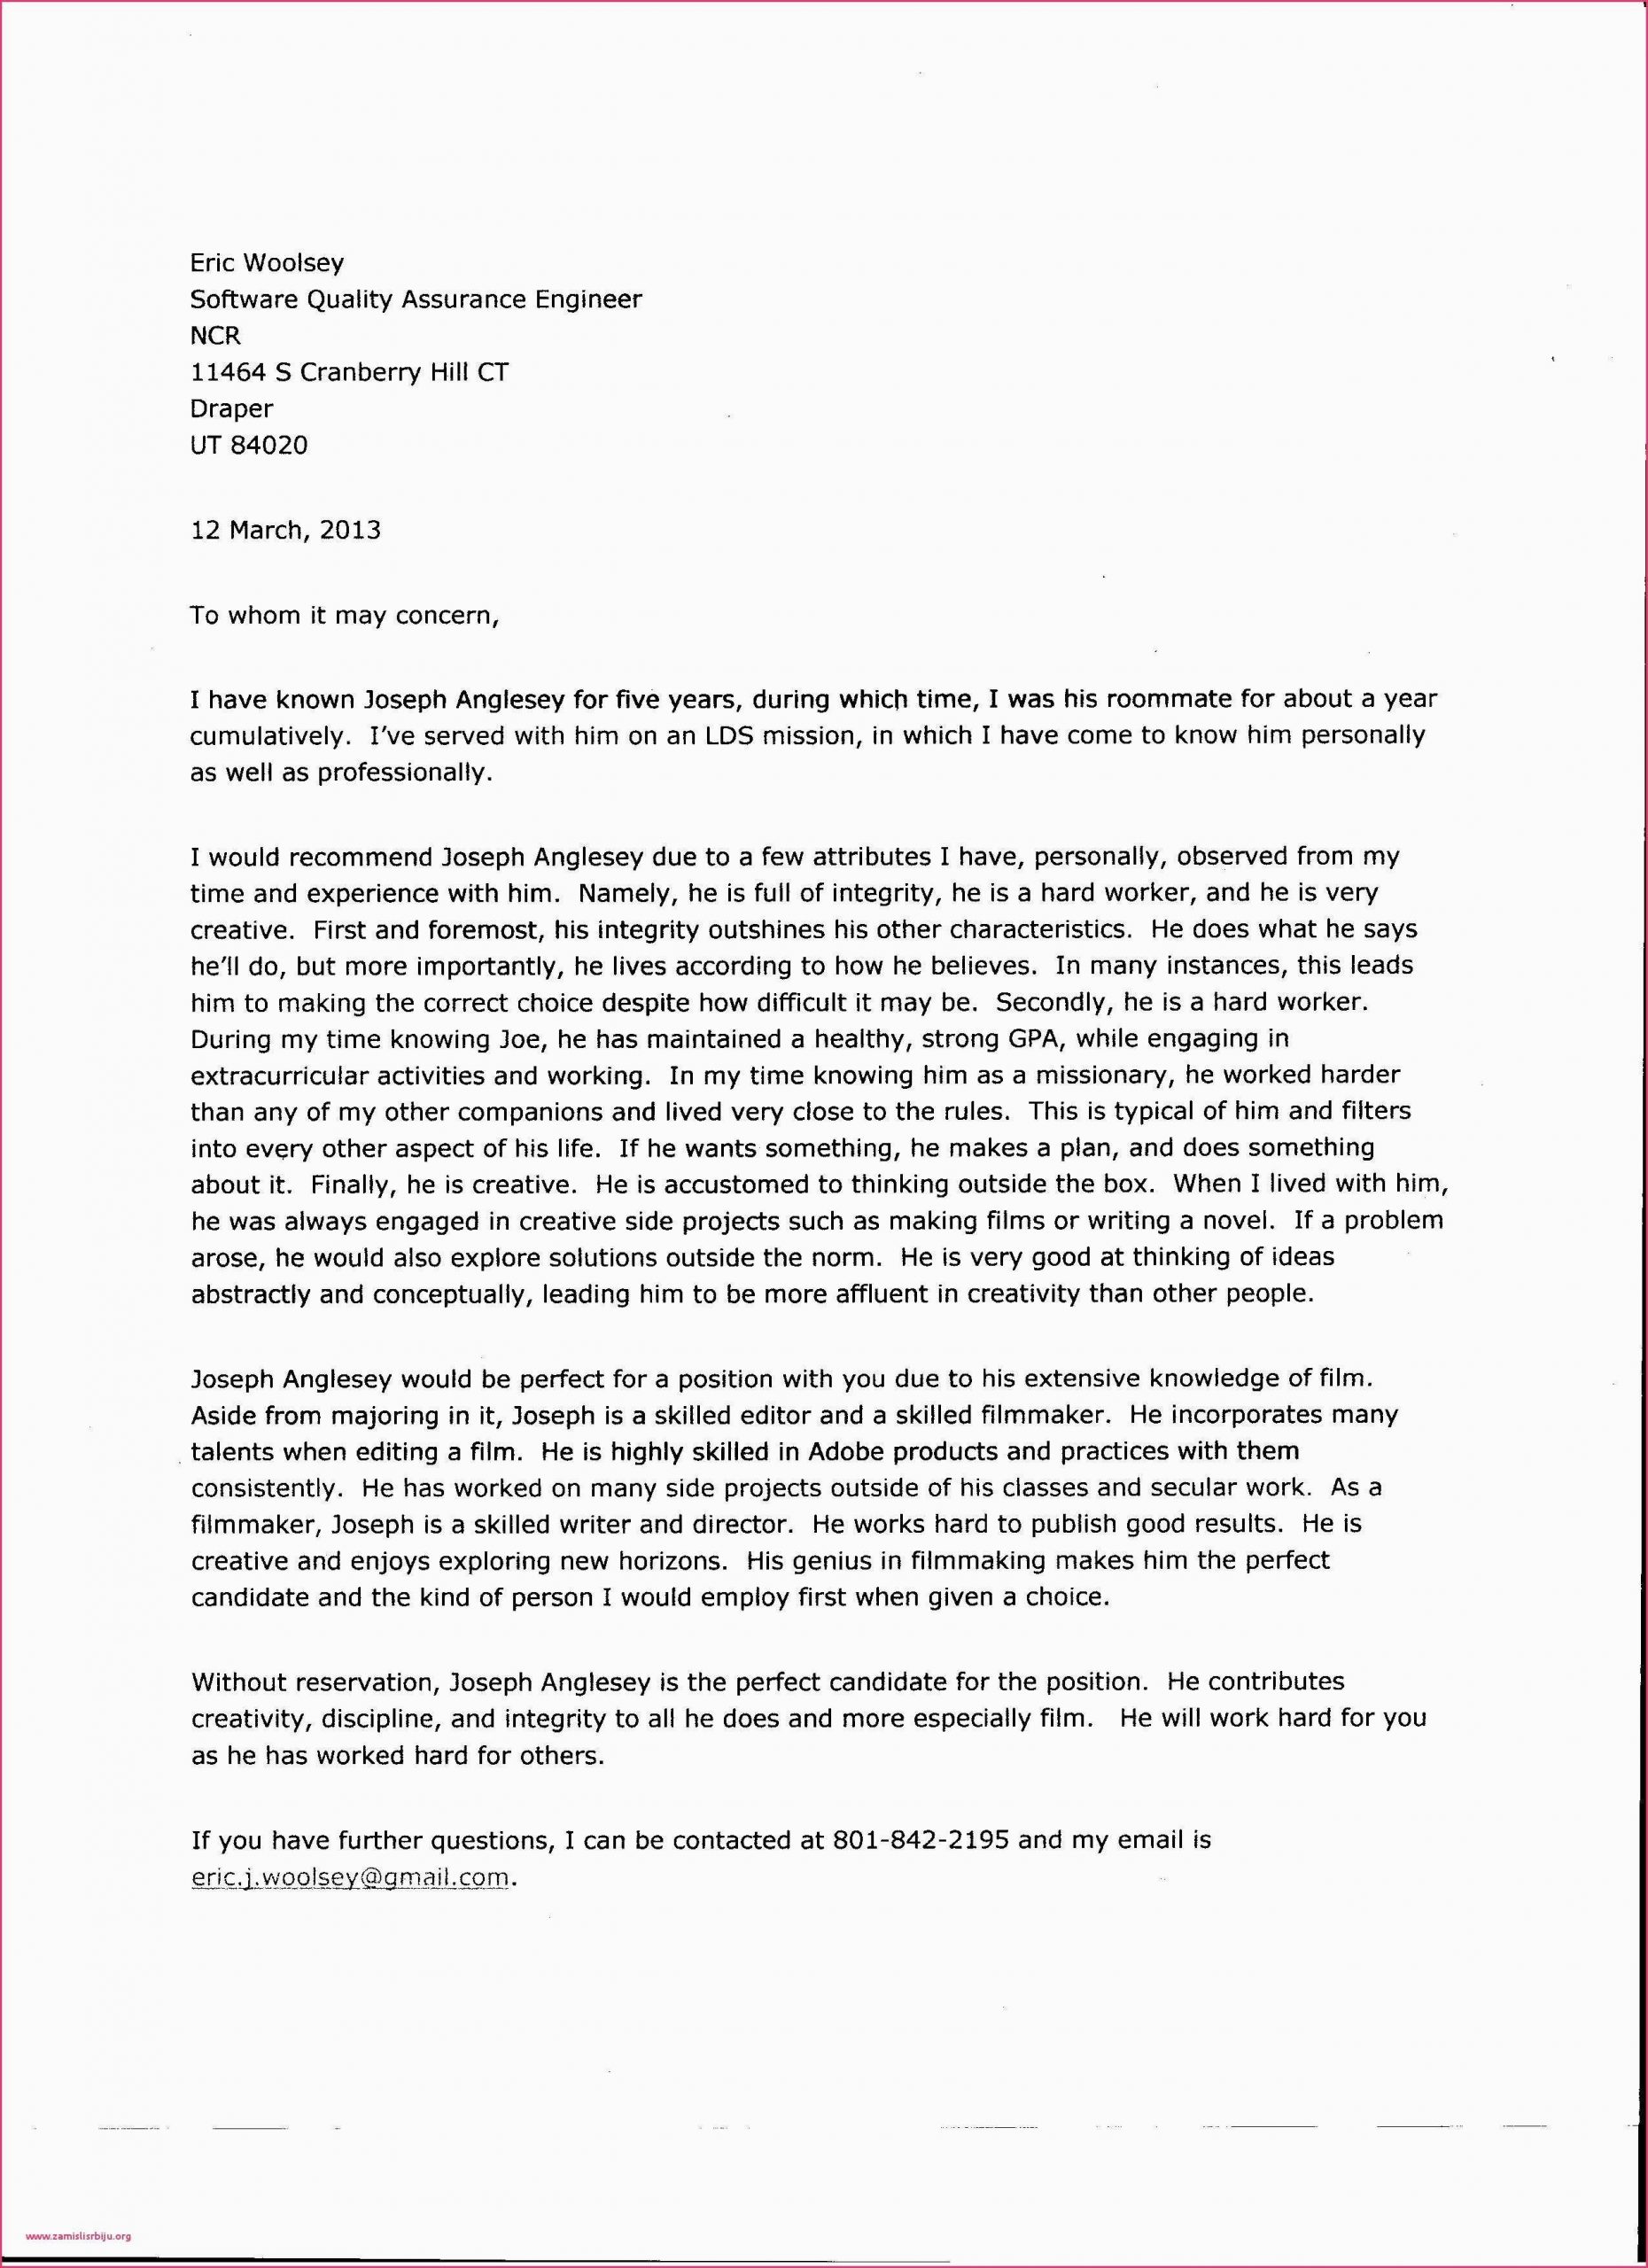 Child Custody Letter Of Recommendation Beautiful Character inside proportions 2550 X 3510